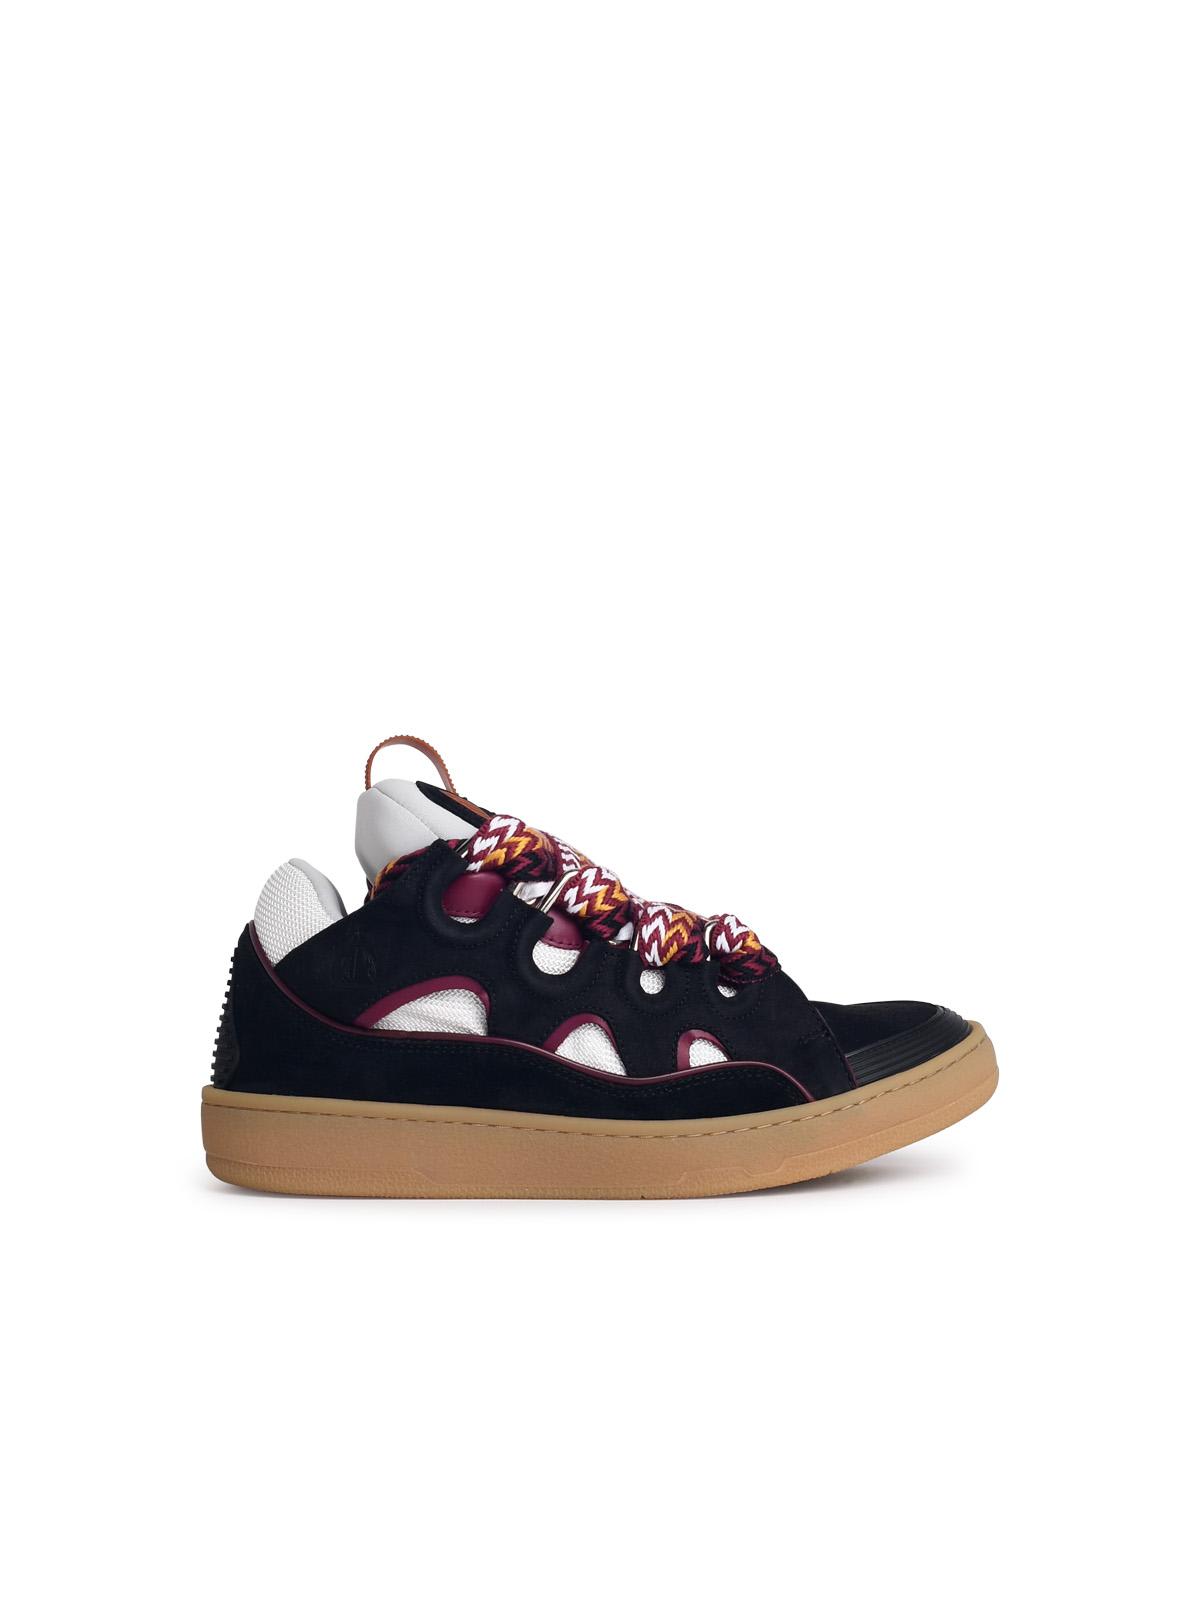 Lanvin Curb Black Leather Blend Sneakers